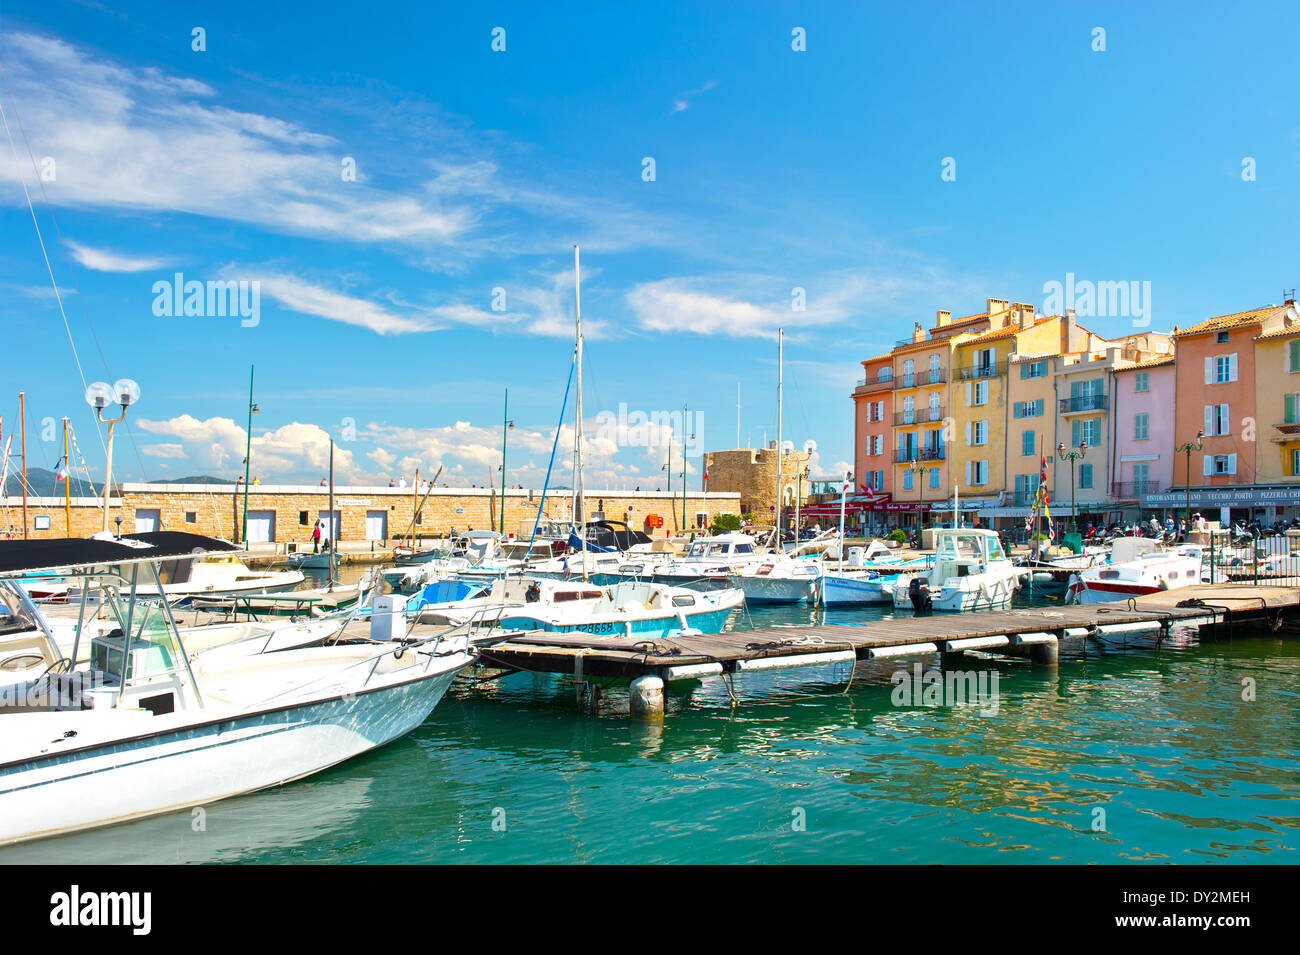 mediterranean landscape with boats and old buildings in harbor of Saint Tropez Stock Photo